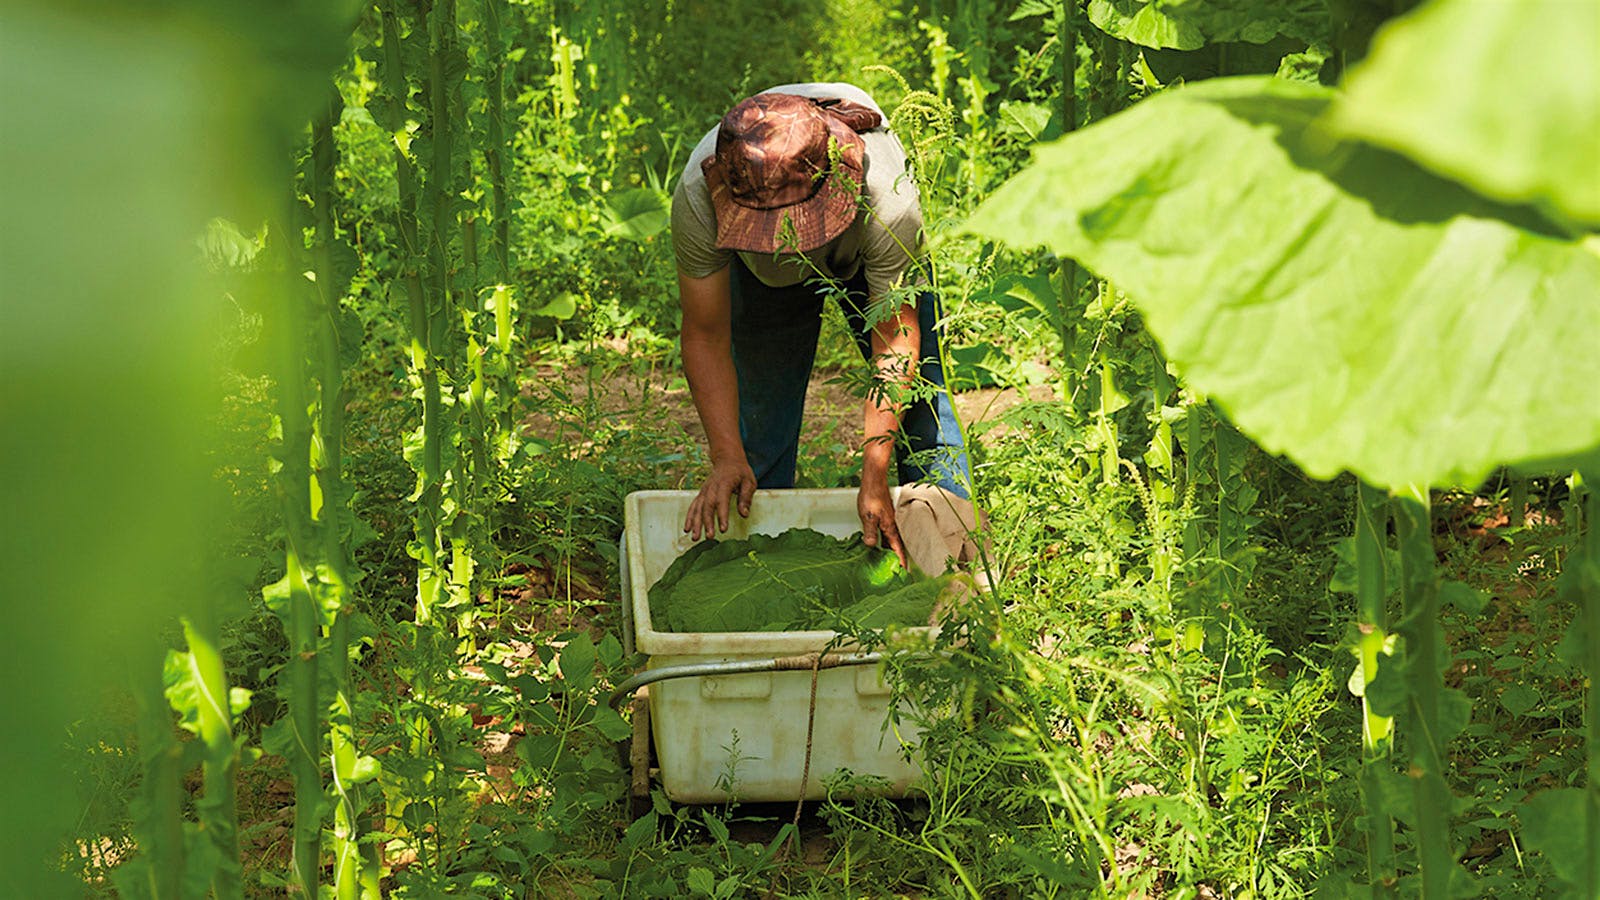 A laborer fills a bin with Connecticut shade leaves.